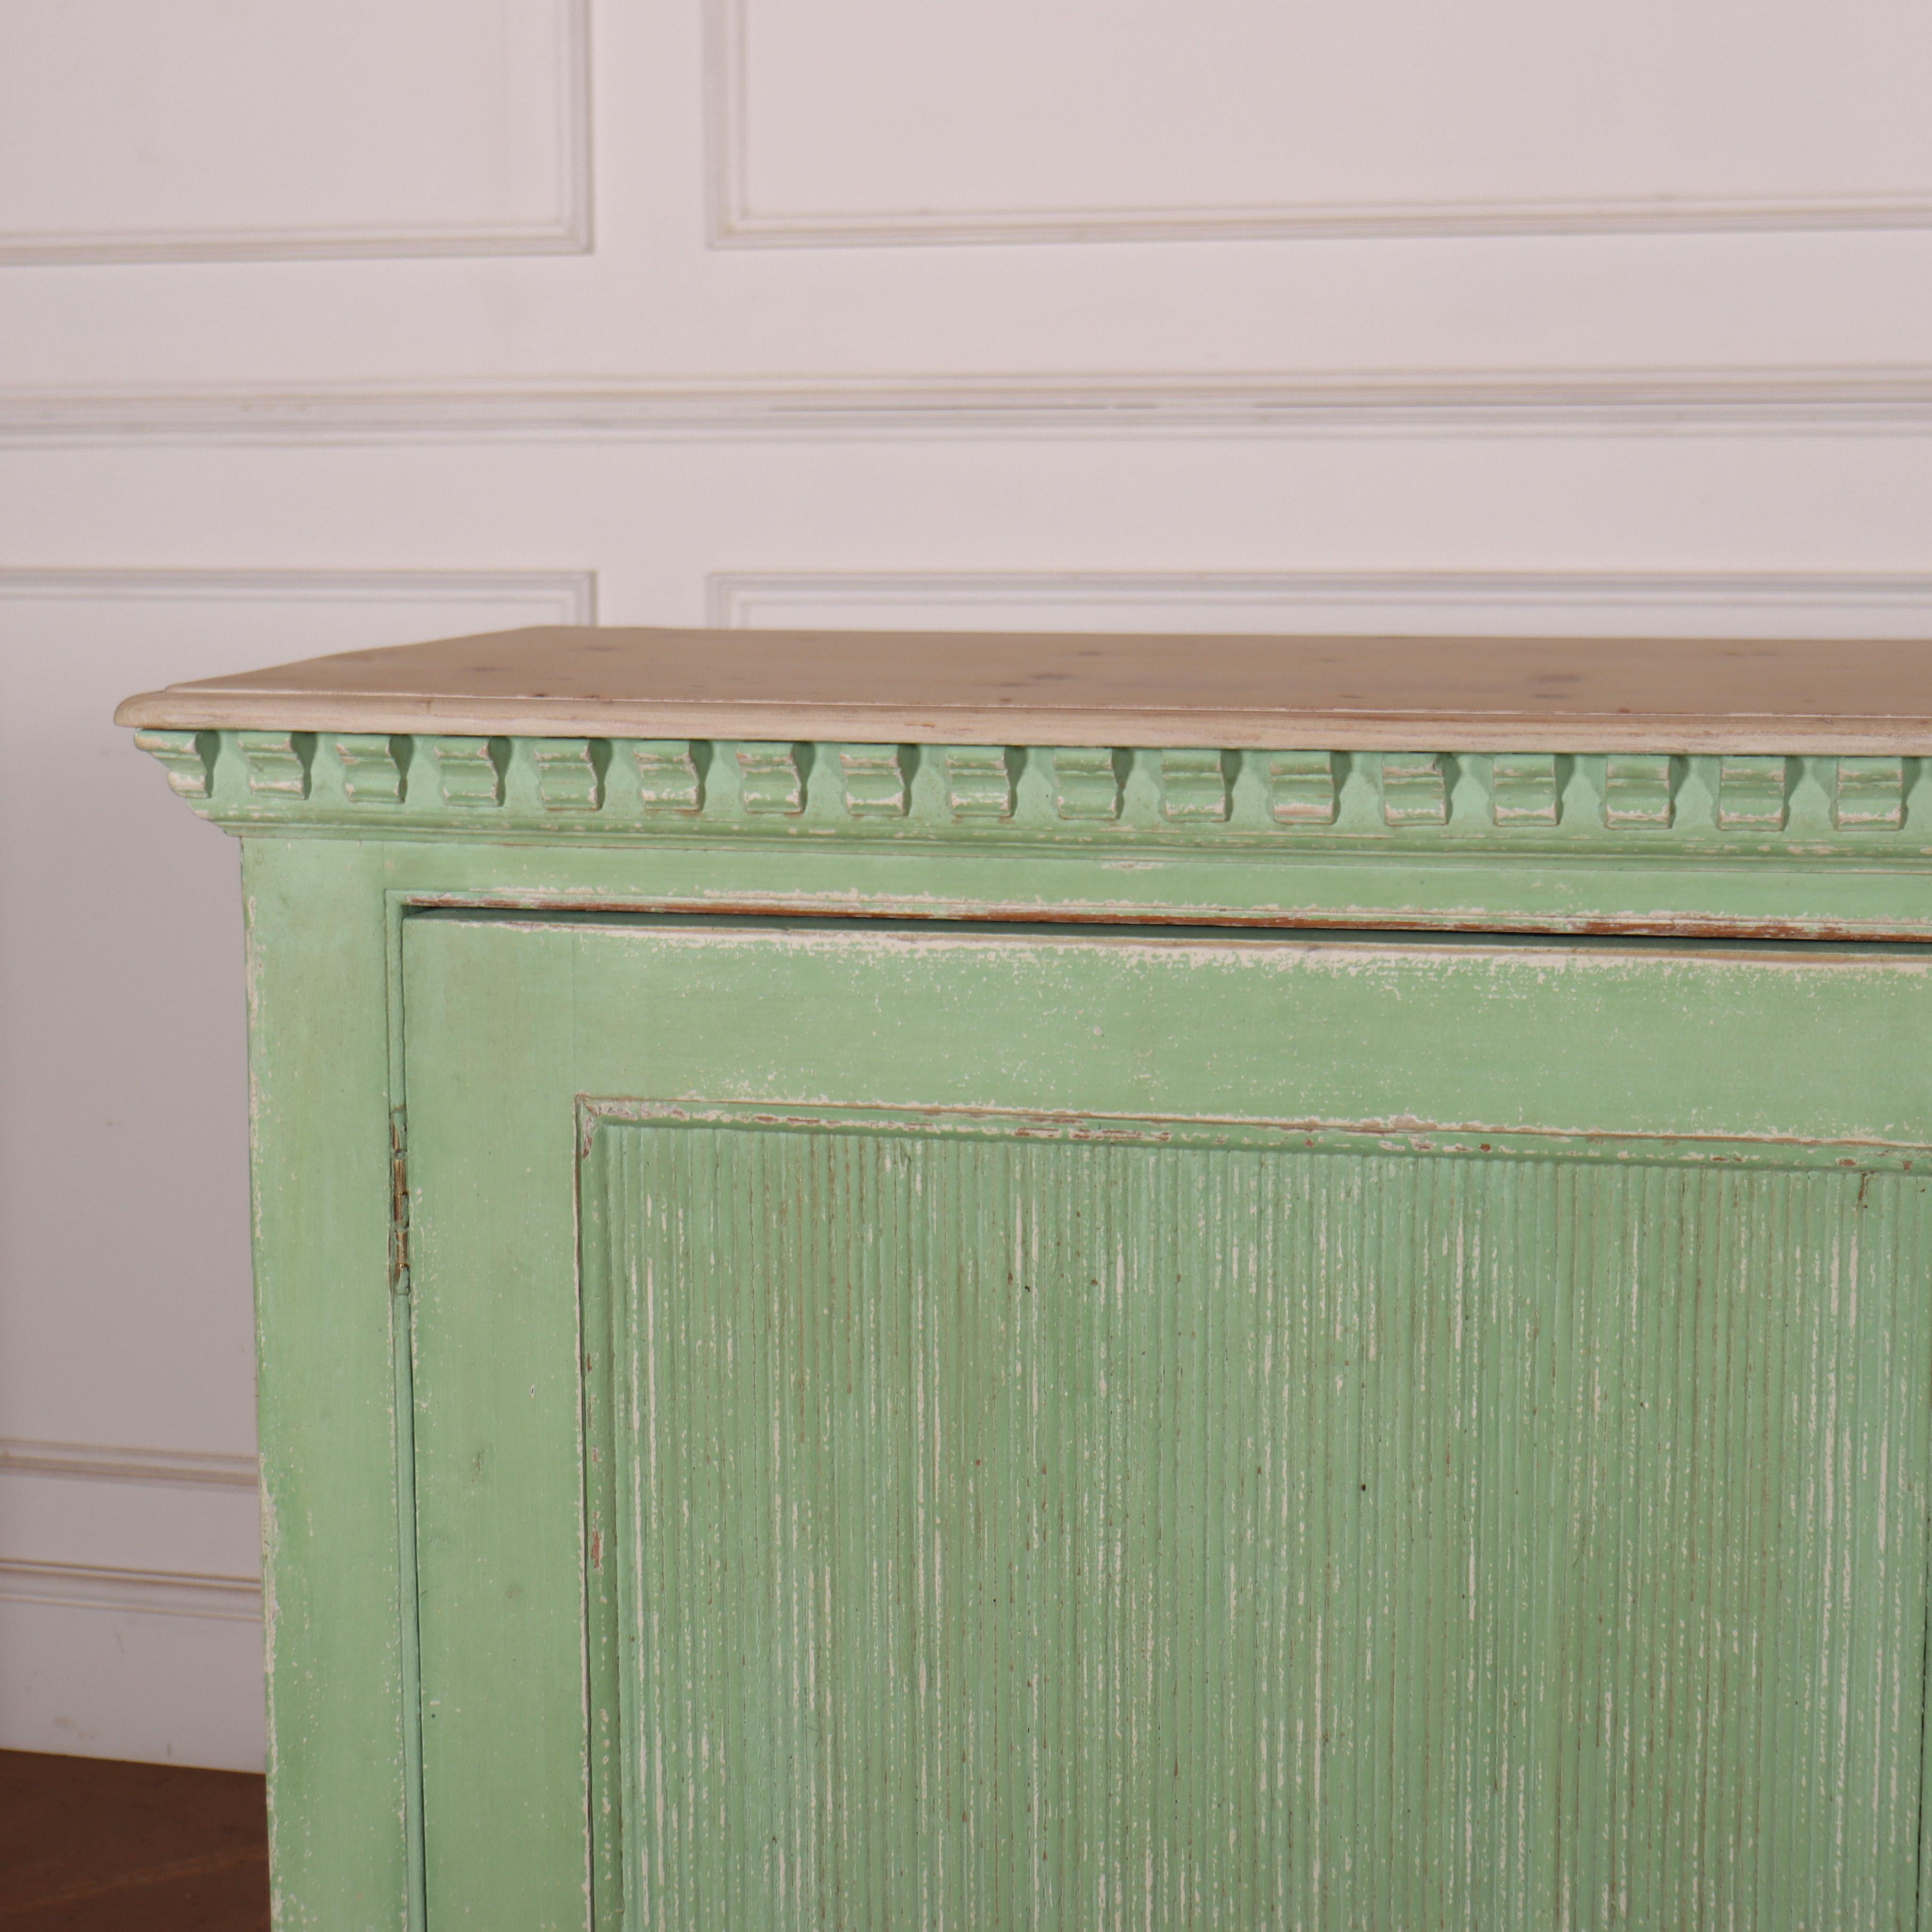 Large 19th C Swedish painted pine dresser base with reeded decoration to the doors. 1840.

Reference: 8080

Dimensions
83 inches (211 cms) Wide
21.5 inches (55 cms) Deep
41 inches (104 cms) High